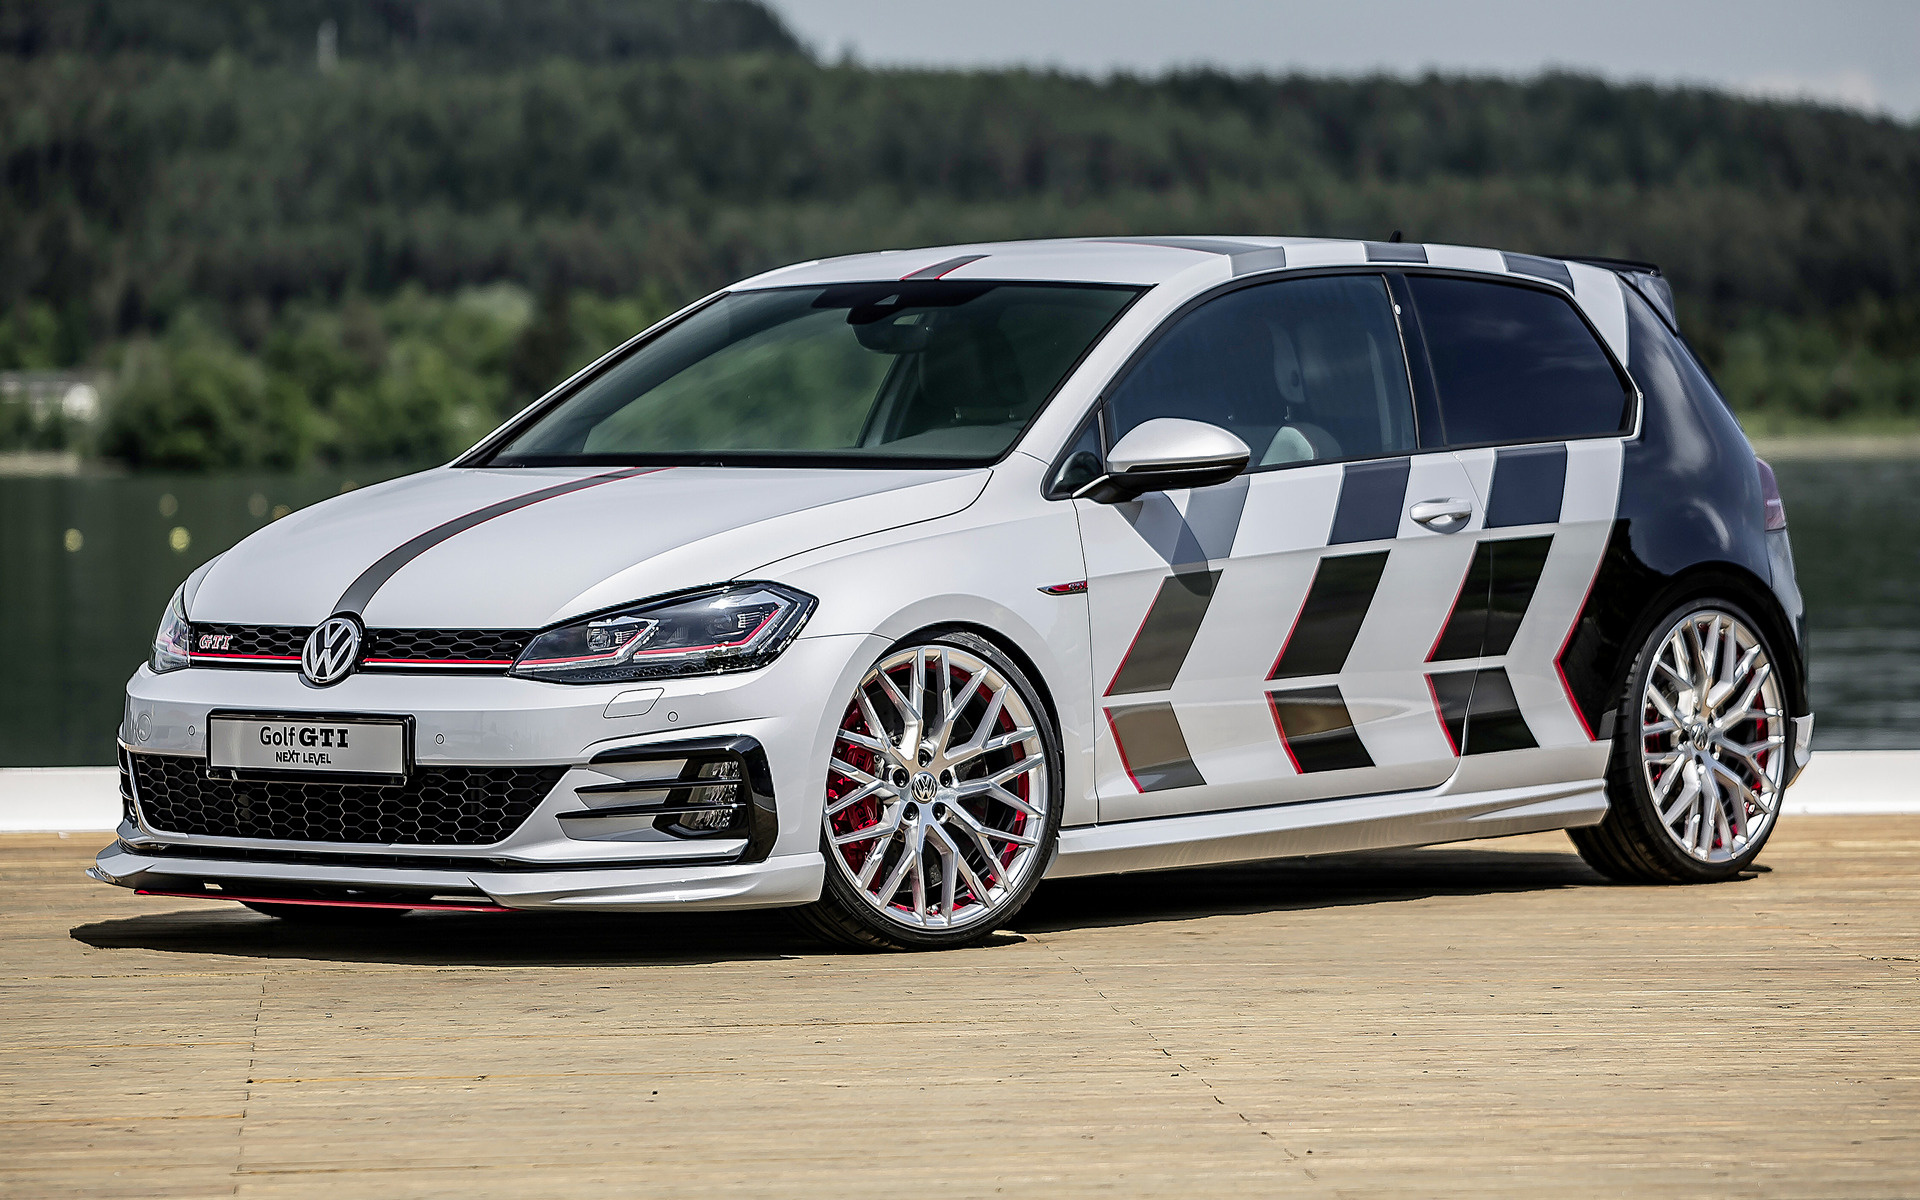 2018 Volkswagen Golf GTI Next Level Concept - Wallpapers and HD Images ...